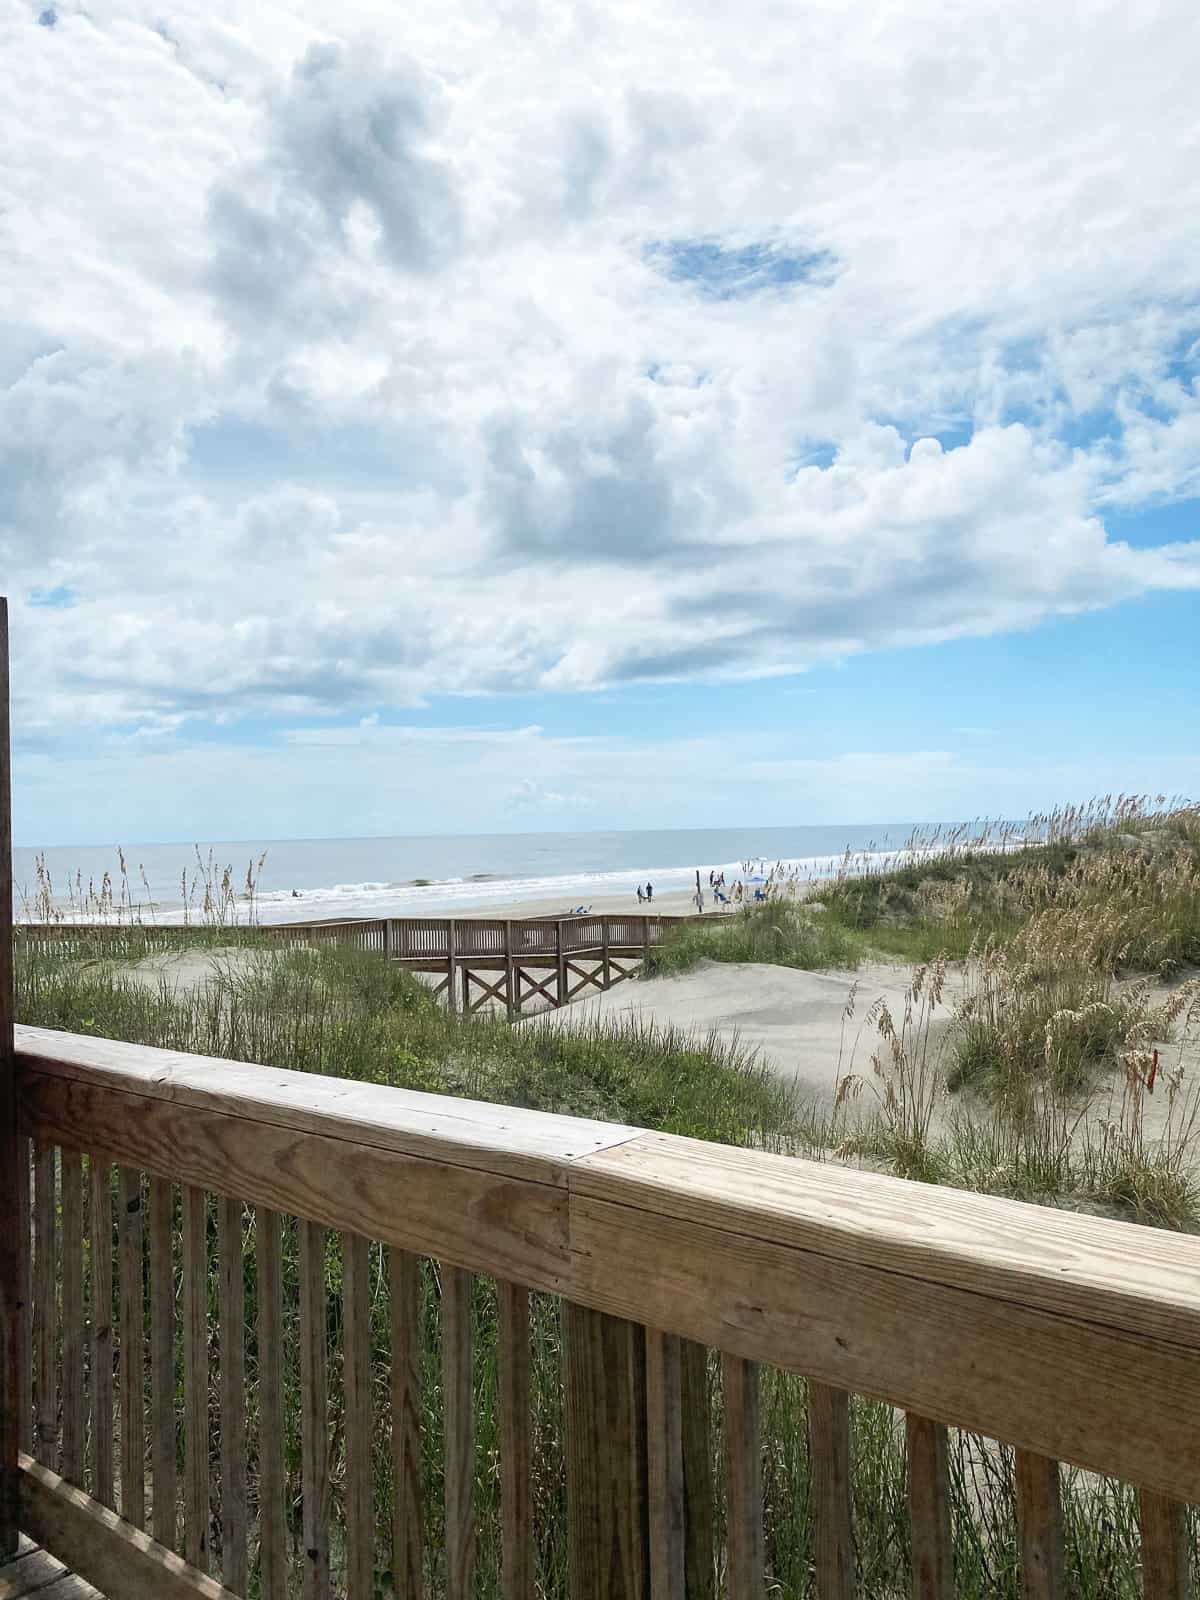 a wooden railing on a boardwalk on a beach with a blue, cloudy sky